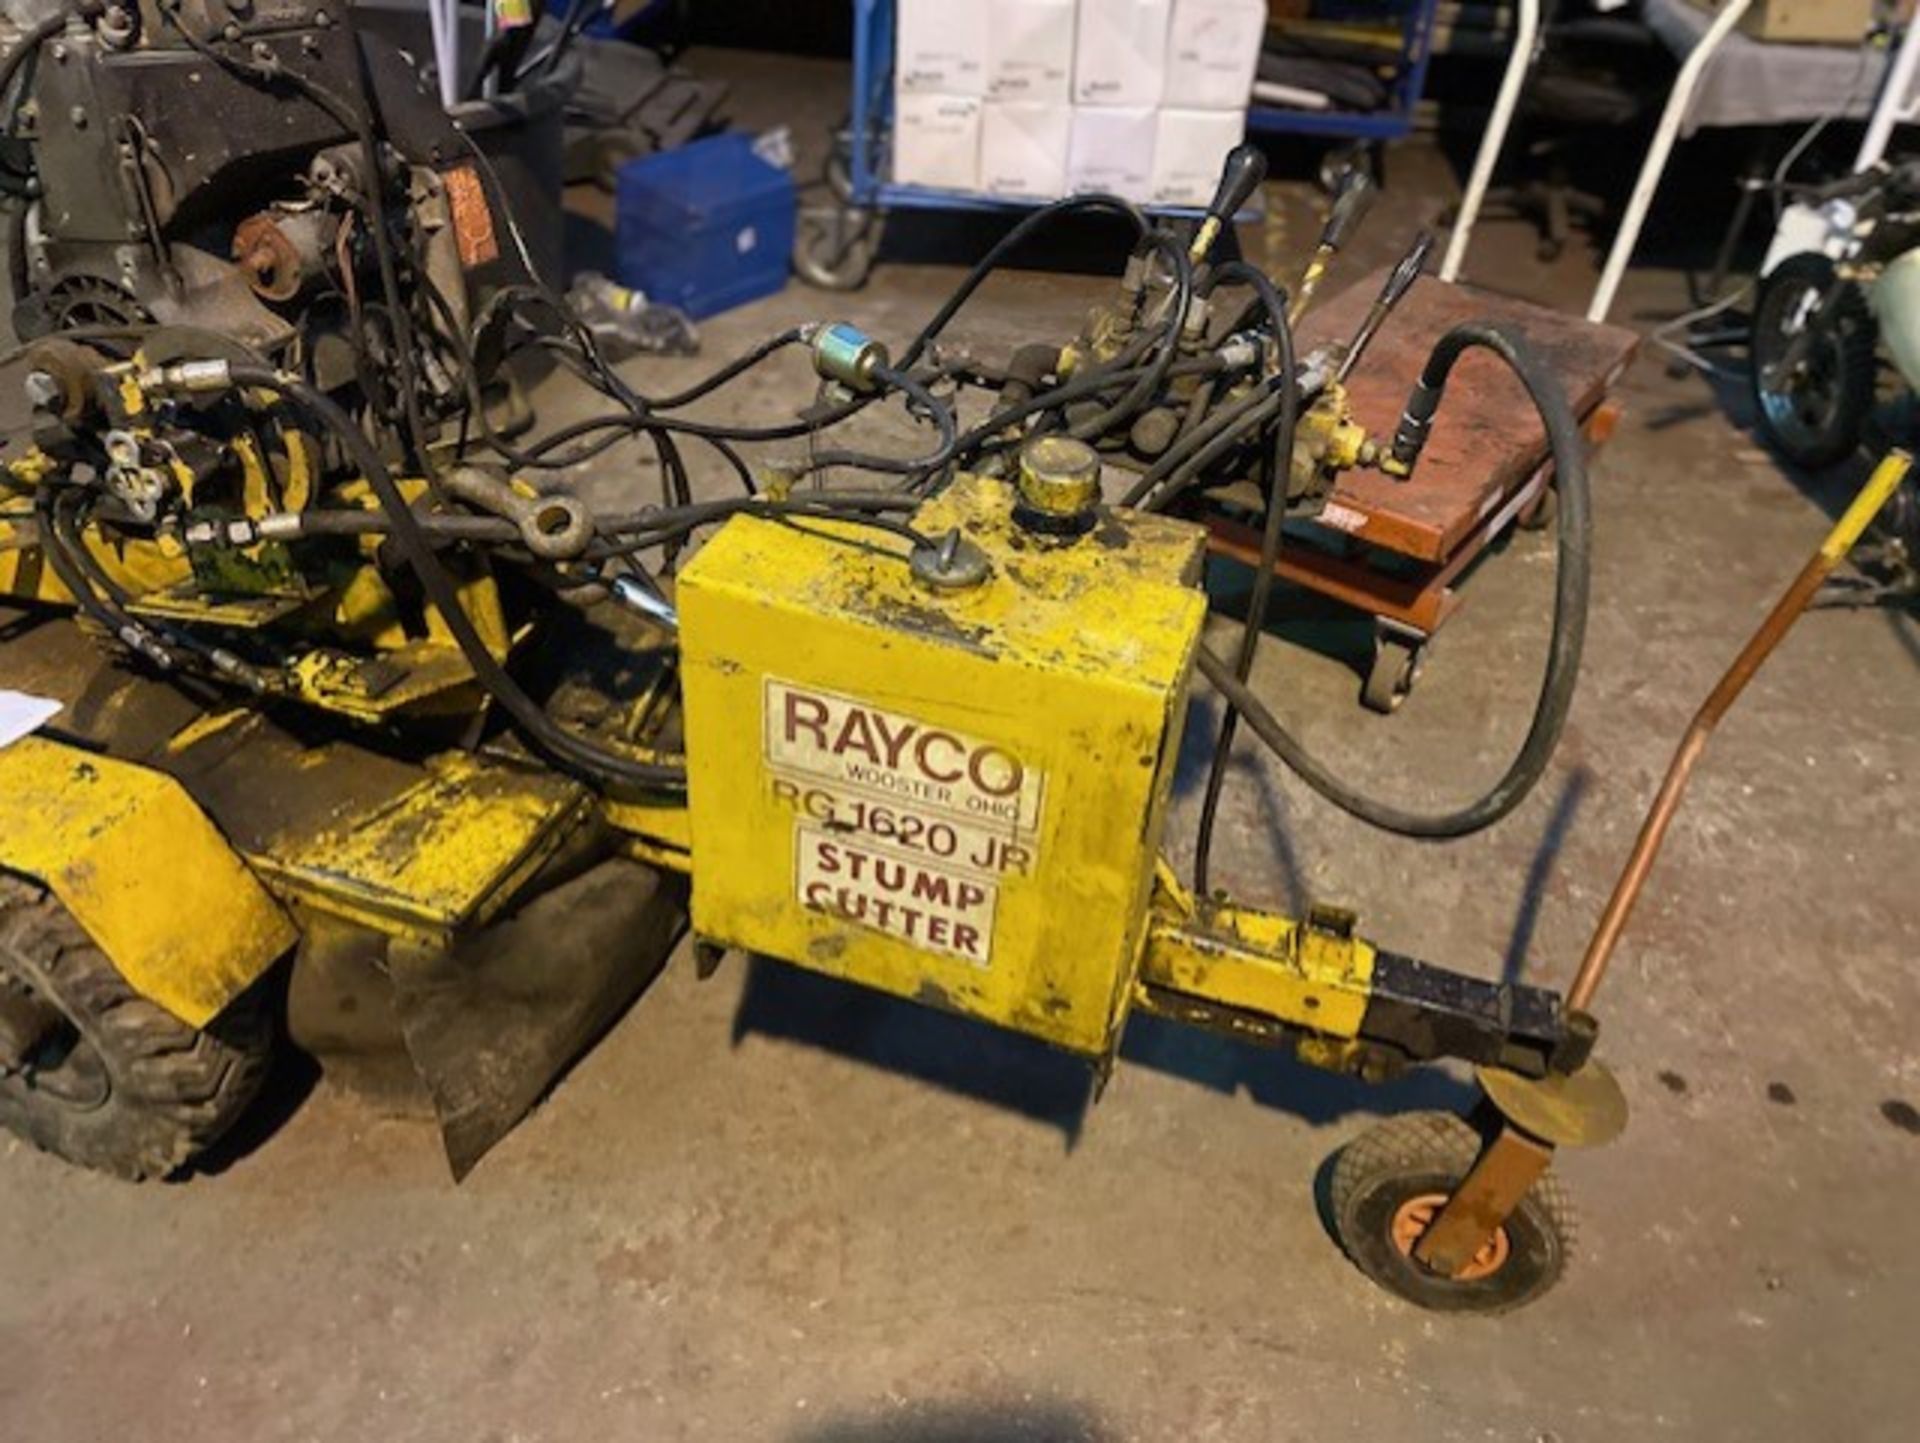 Stump grinder rayco 1620 with a diesel engine al together from belts to frame rare machine locking - Image 5 of 6